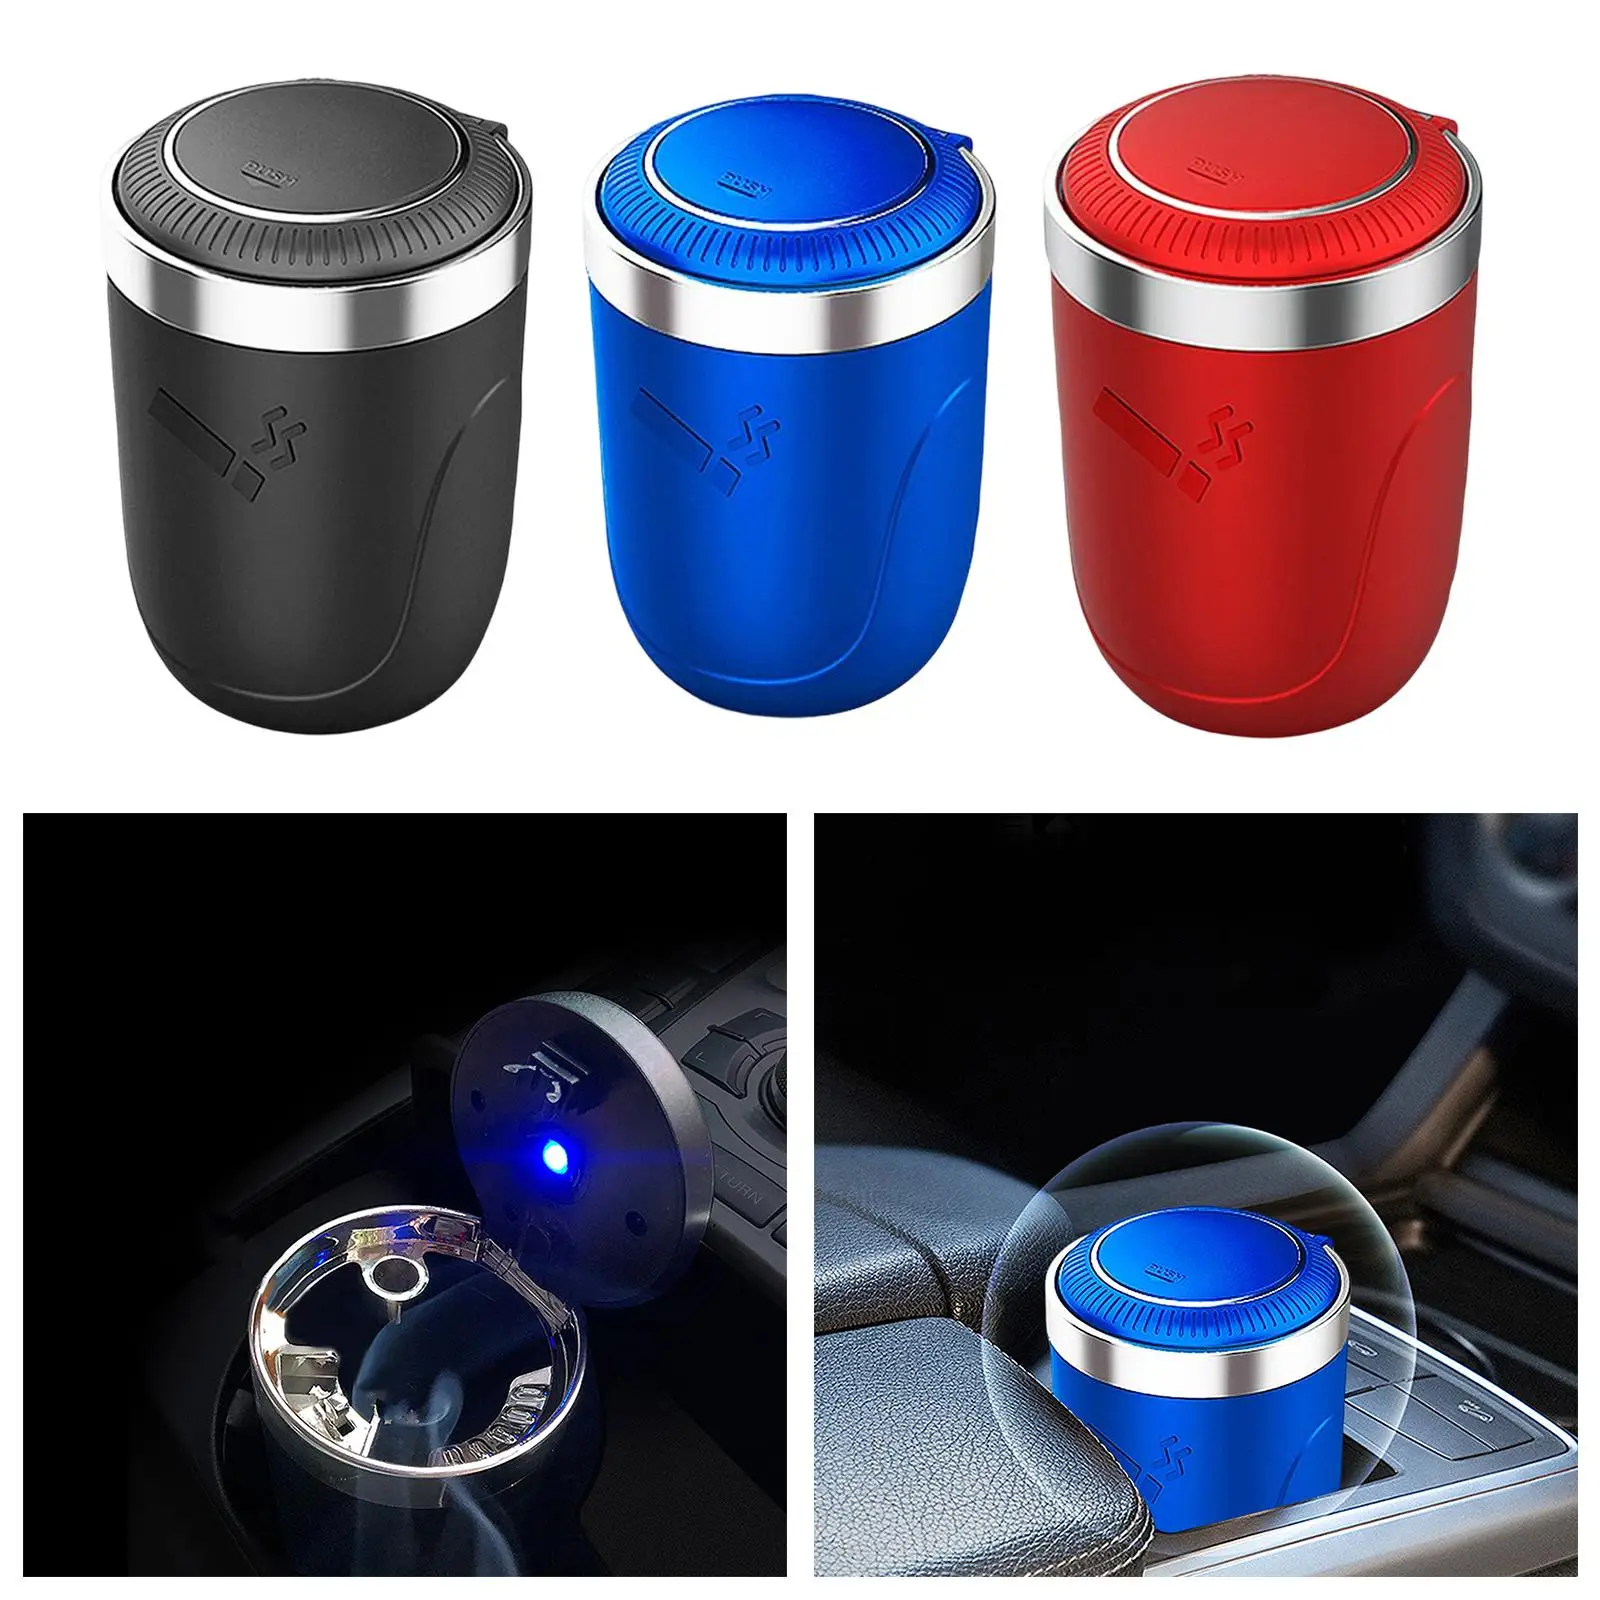 Car Ashtray with Lid Stainless Steel Ashtray Container Cigar Ash Bucket Ash Tray for Car Cup Holder Outdoor Travel Home Use